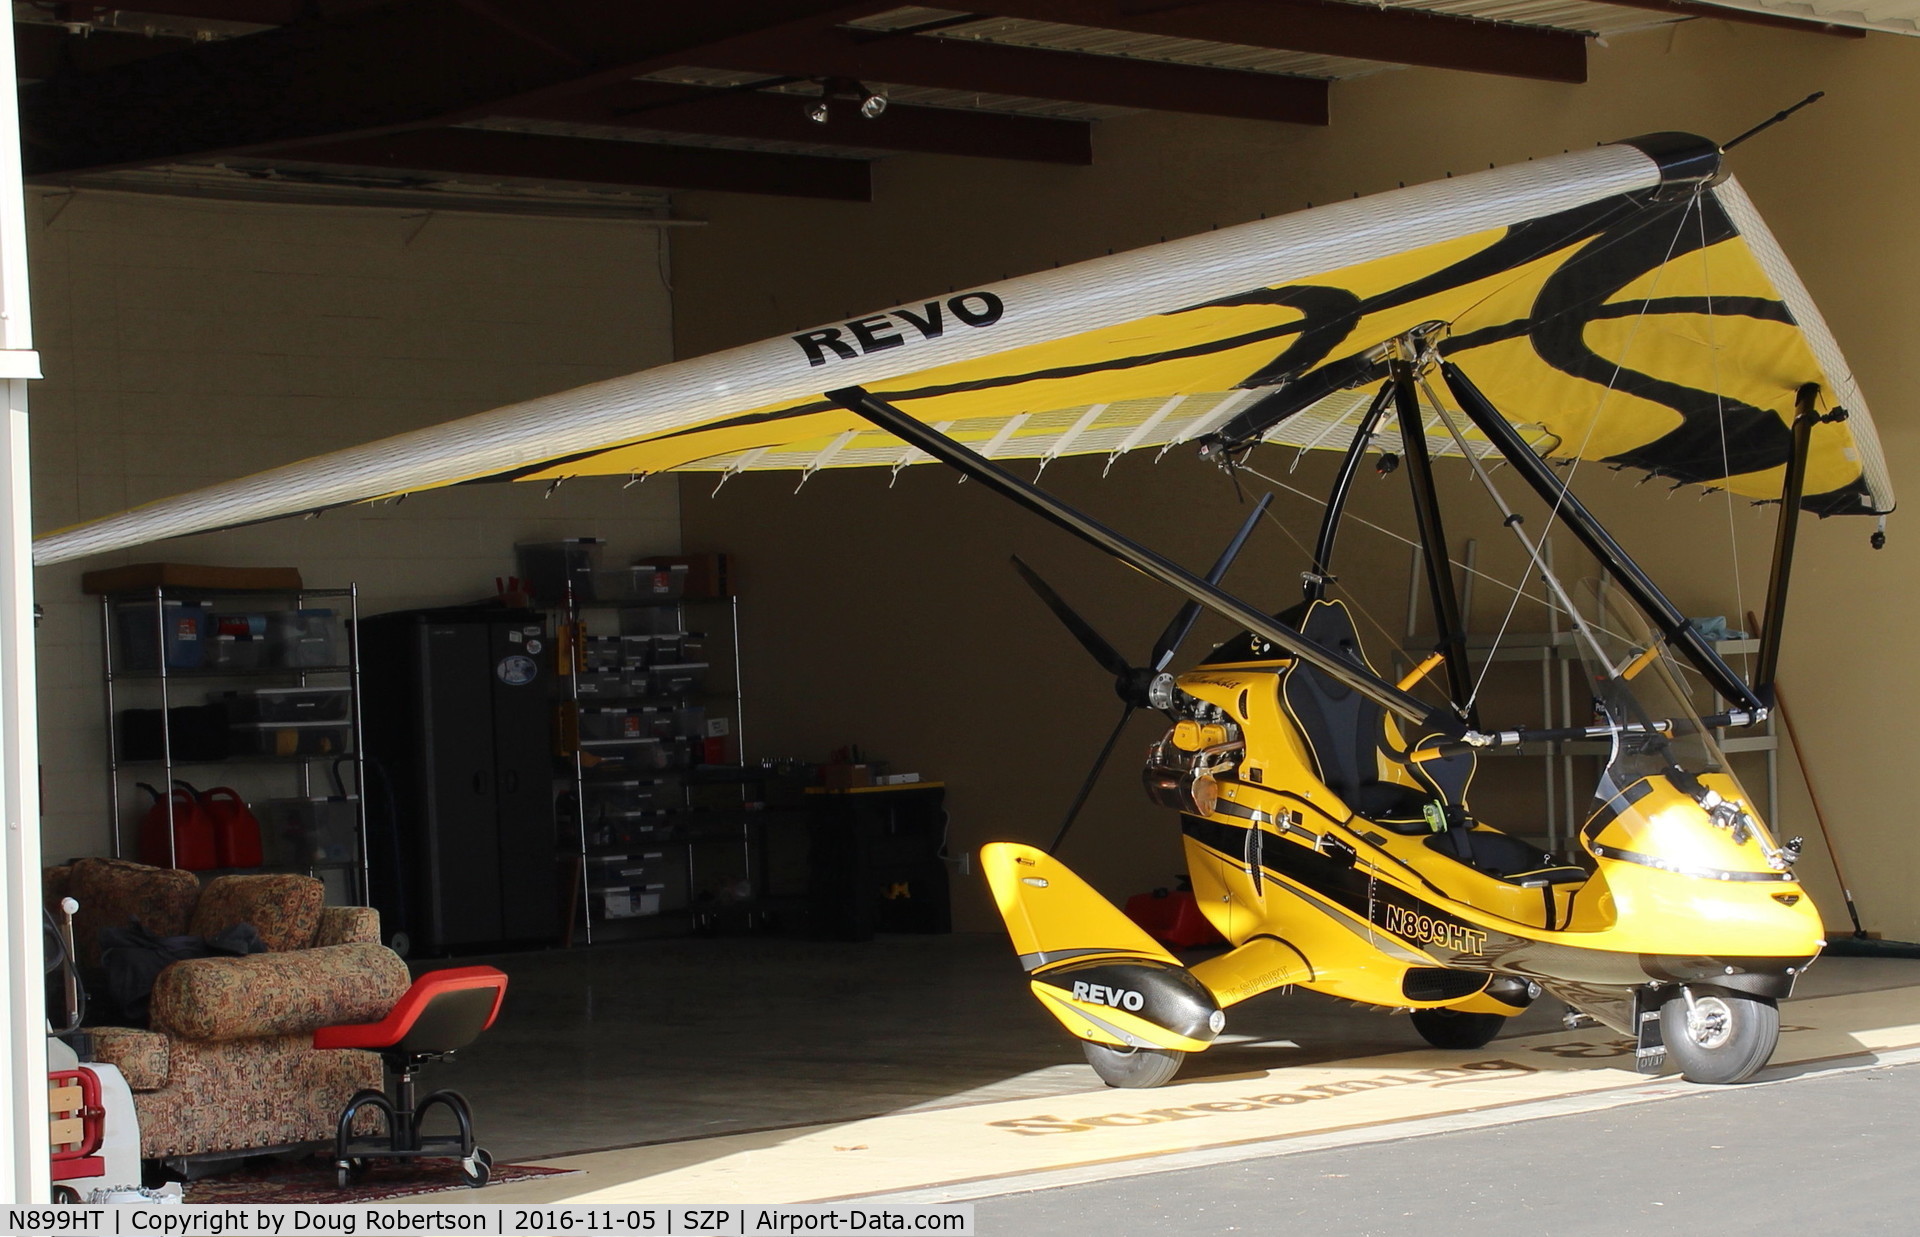 N899HT, 2016 Evolution Trikes Revo C/N 000618, 2016 Evolution Aircraft REVO RIVAL X, weight-shift control production LSA, Rotax 912ULS 100 Hp pusher, camera mounts-equipped. In its hangar.